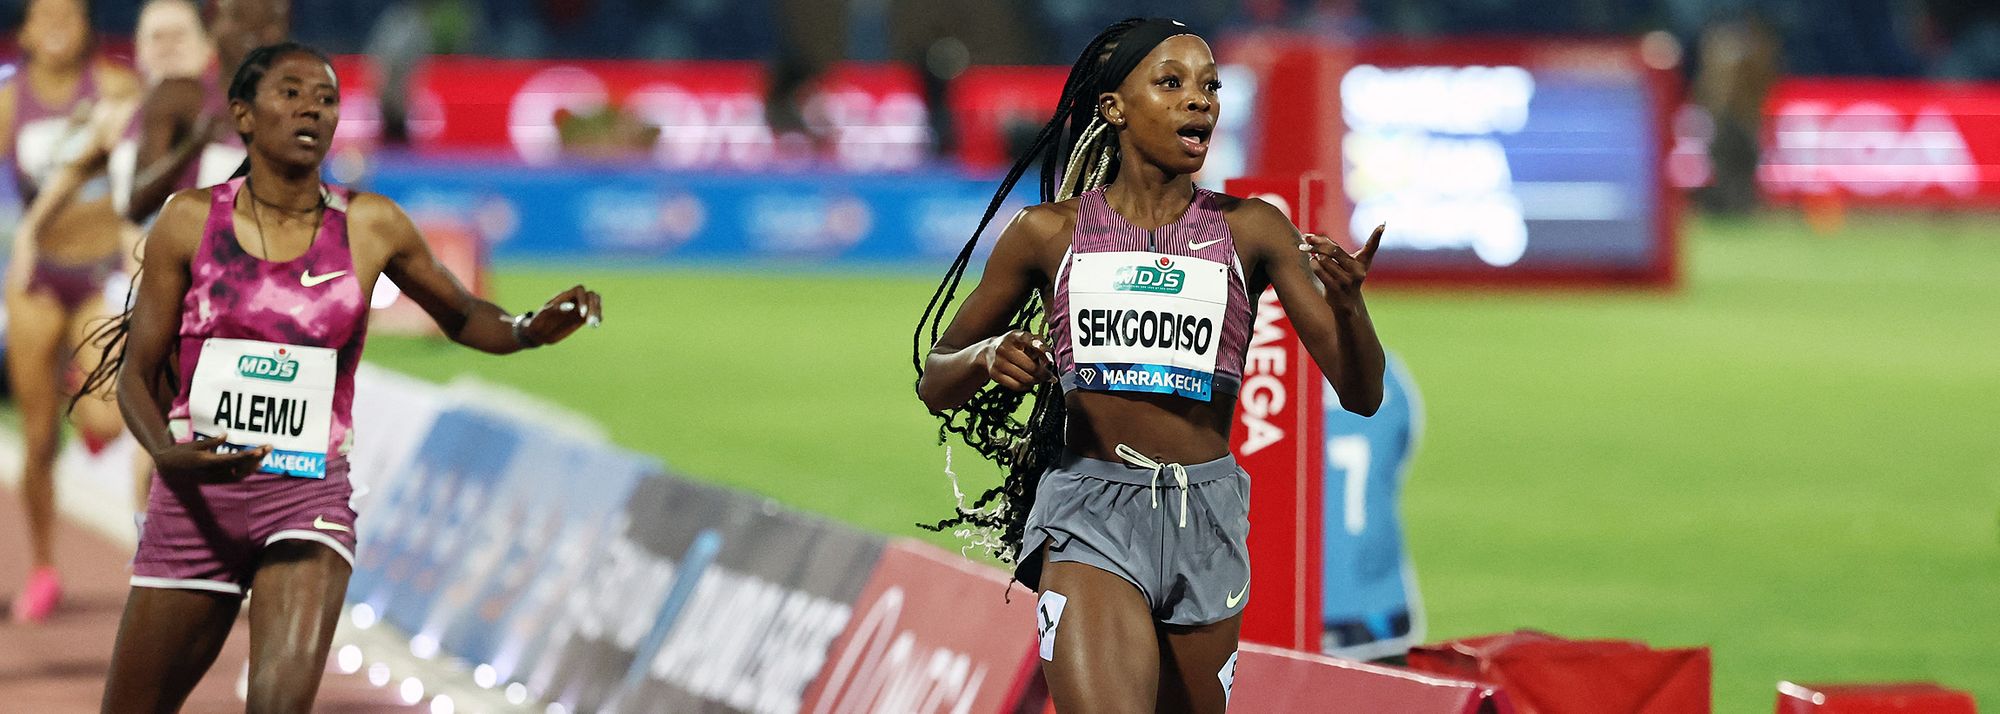 South Africa’s Prudence Sekgodiso achieved her first ever victory in a Wanda Diamond League meeting